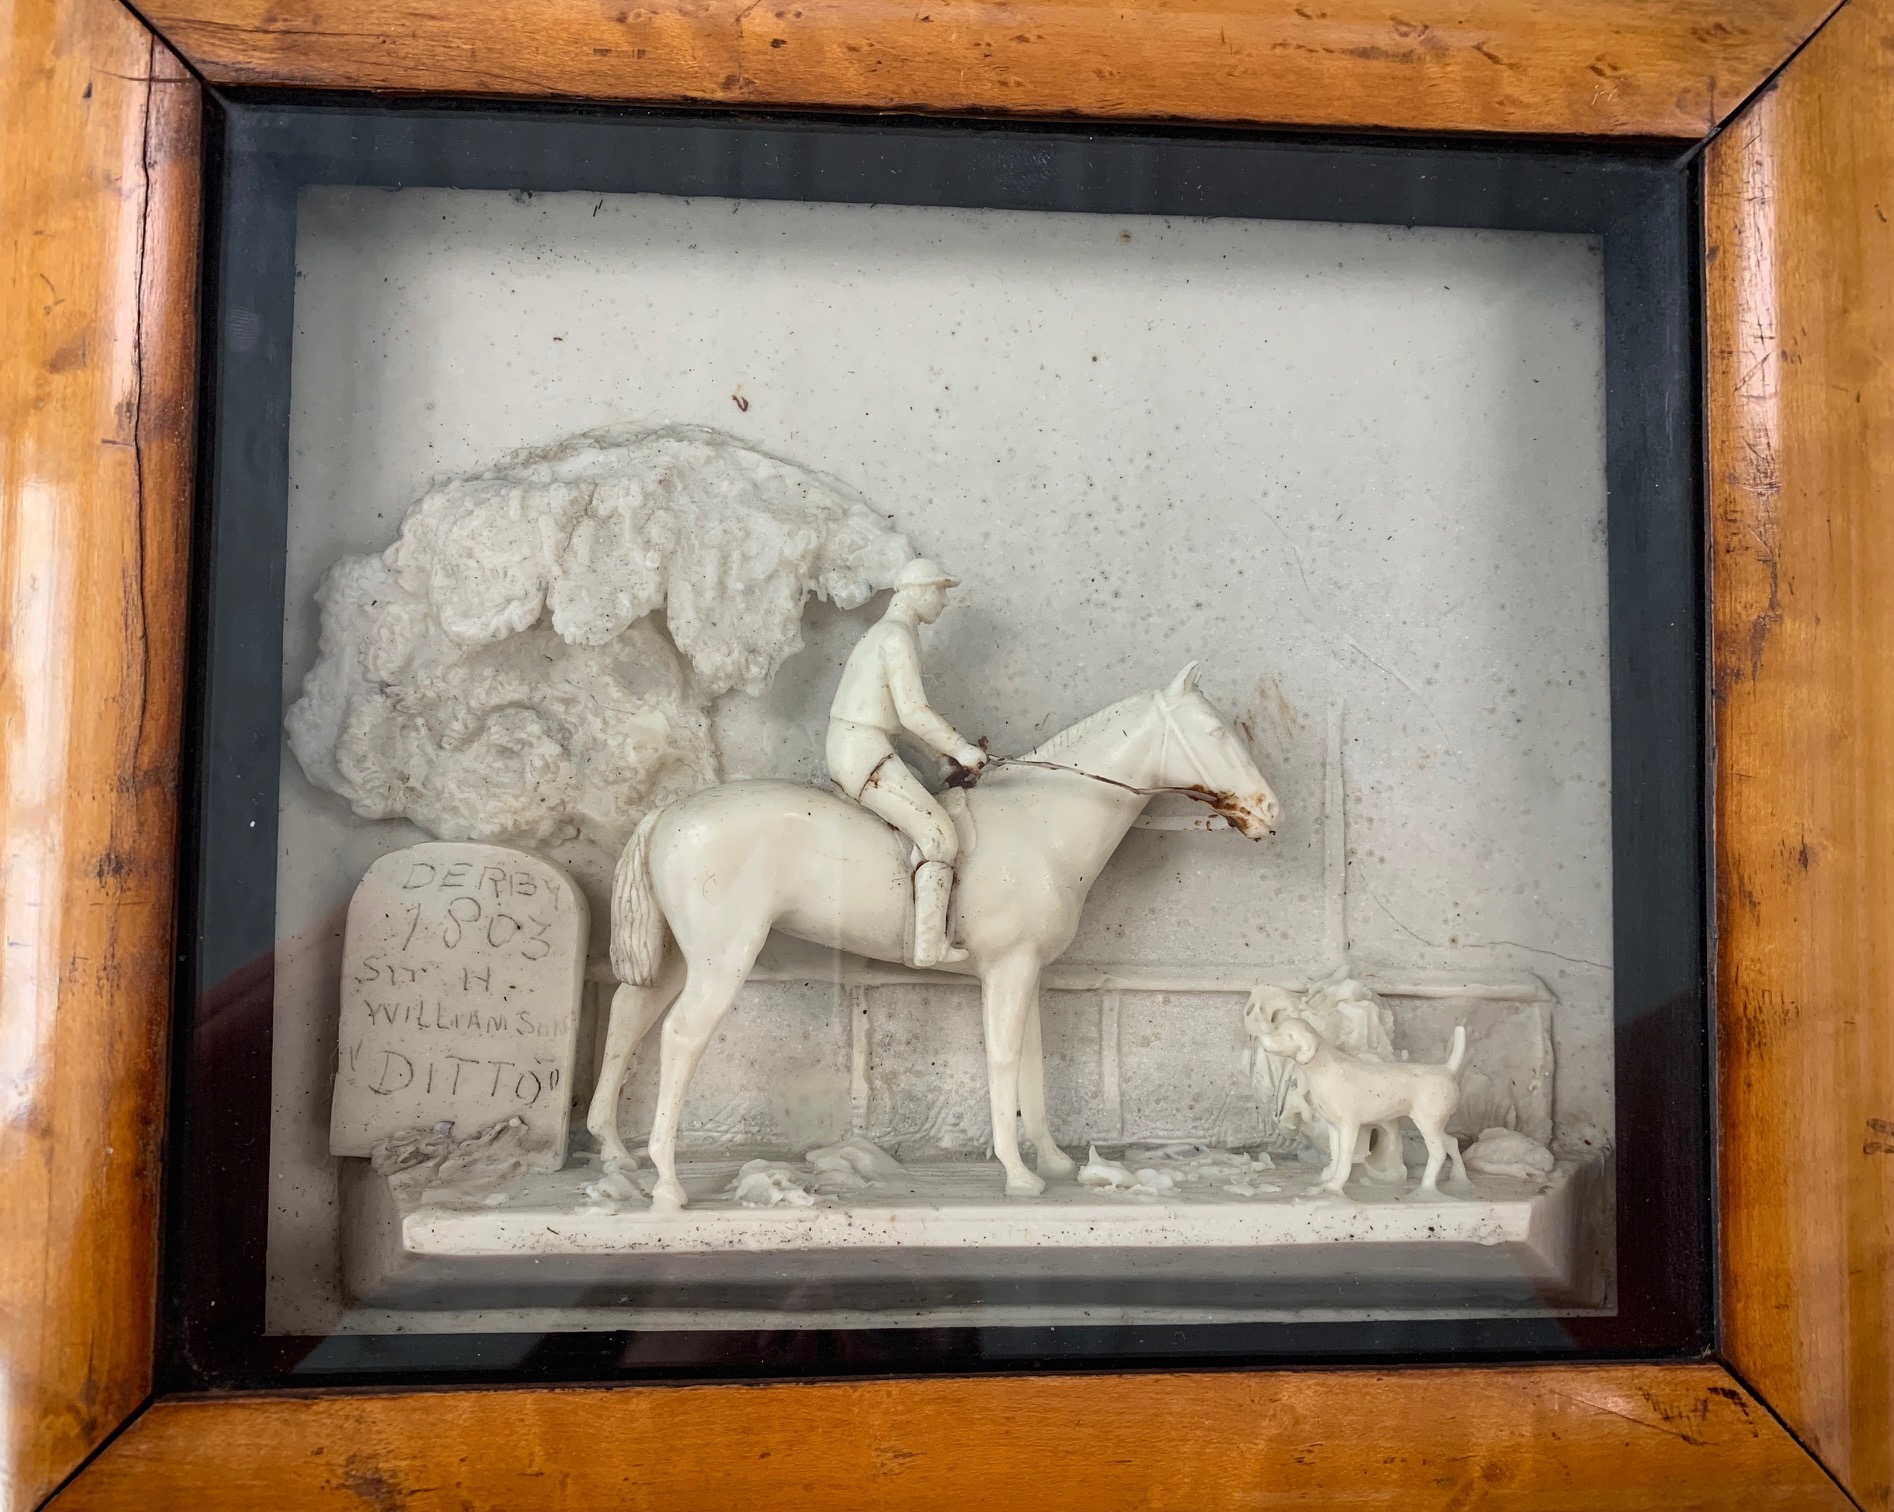 A Regency period wax diorama of the Derby Winner 'Ditto', 1803 - Image 2 of 3